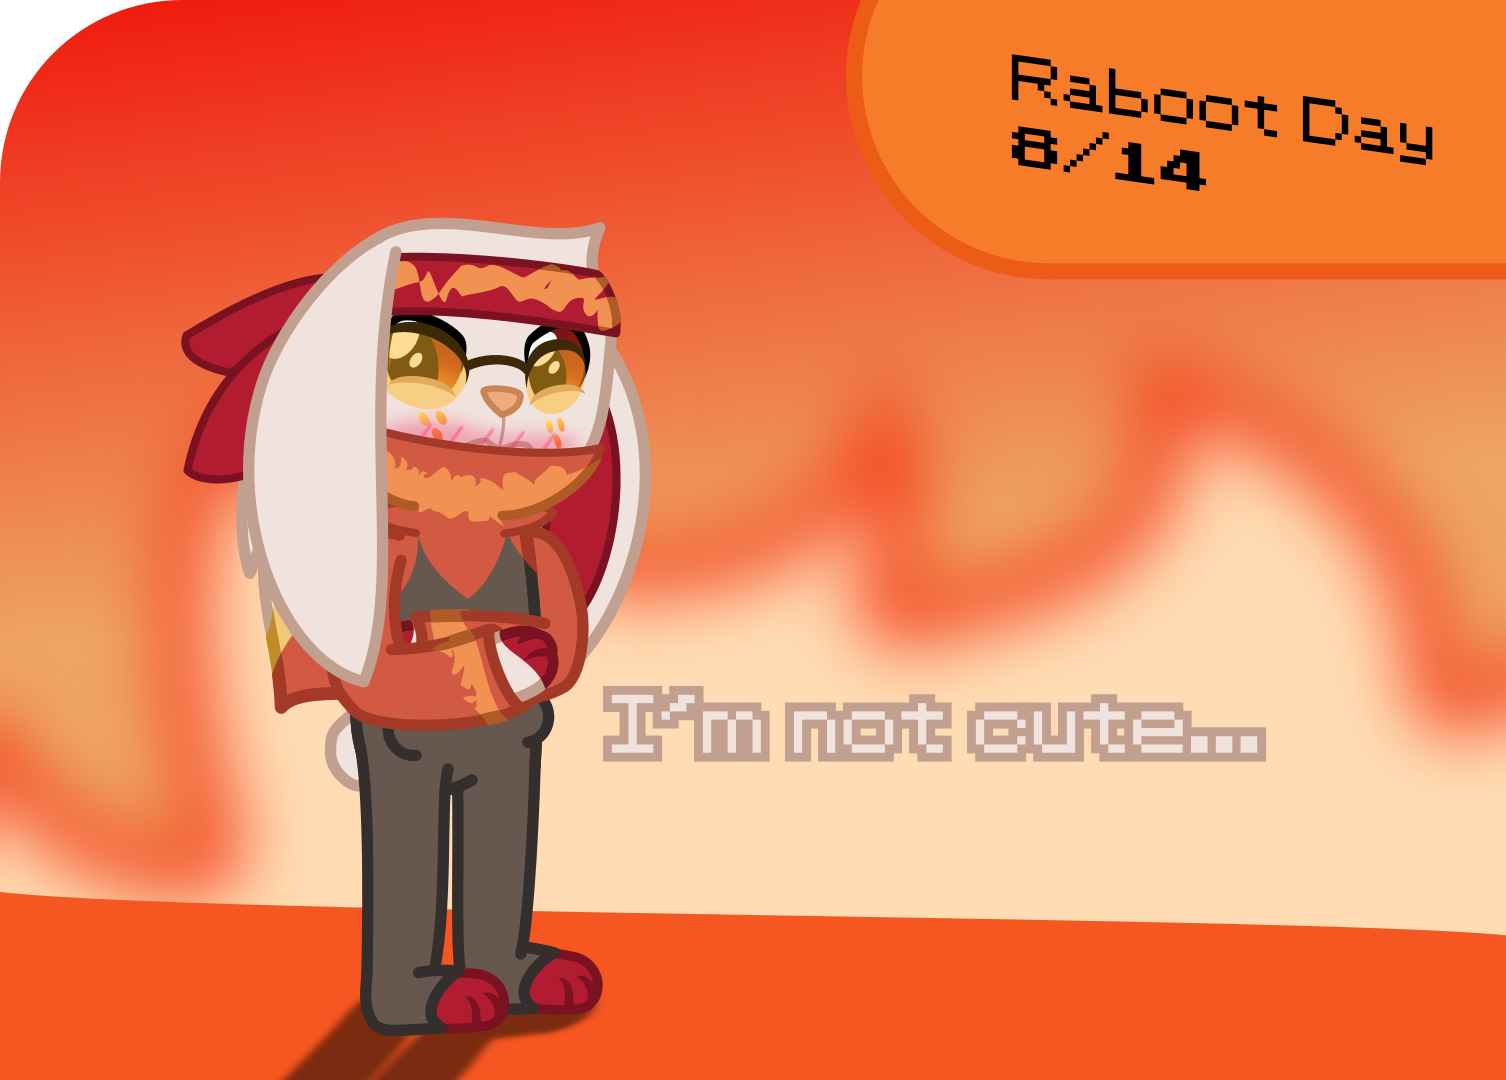 A raboot says 'I'm not cute...'